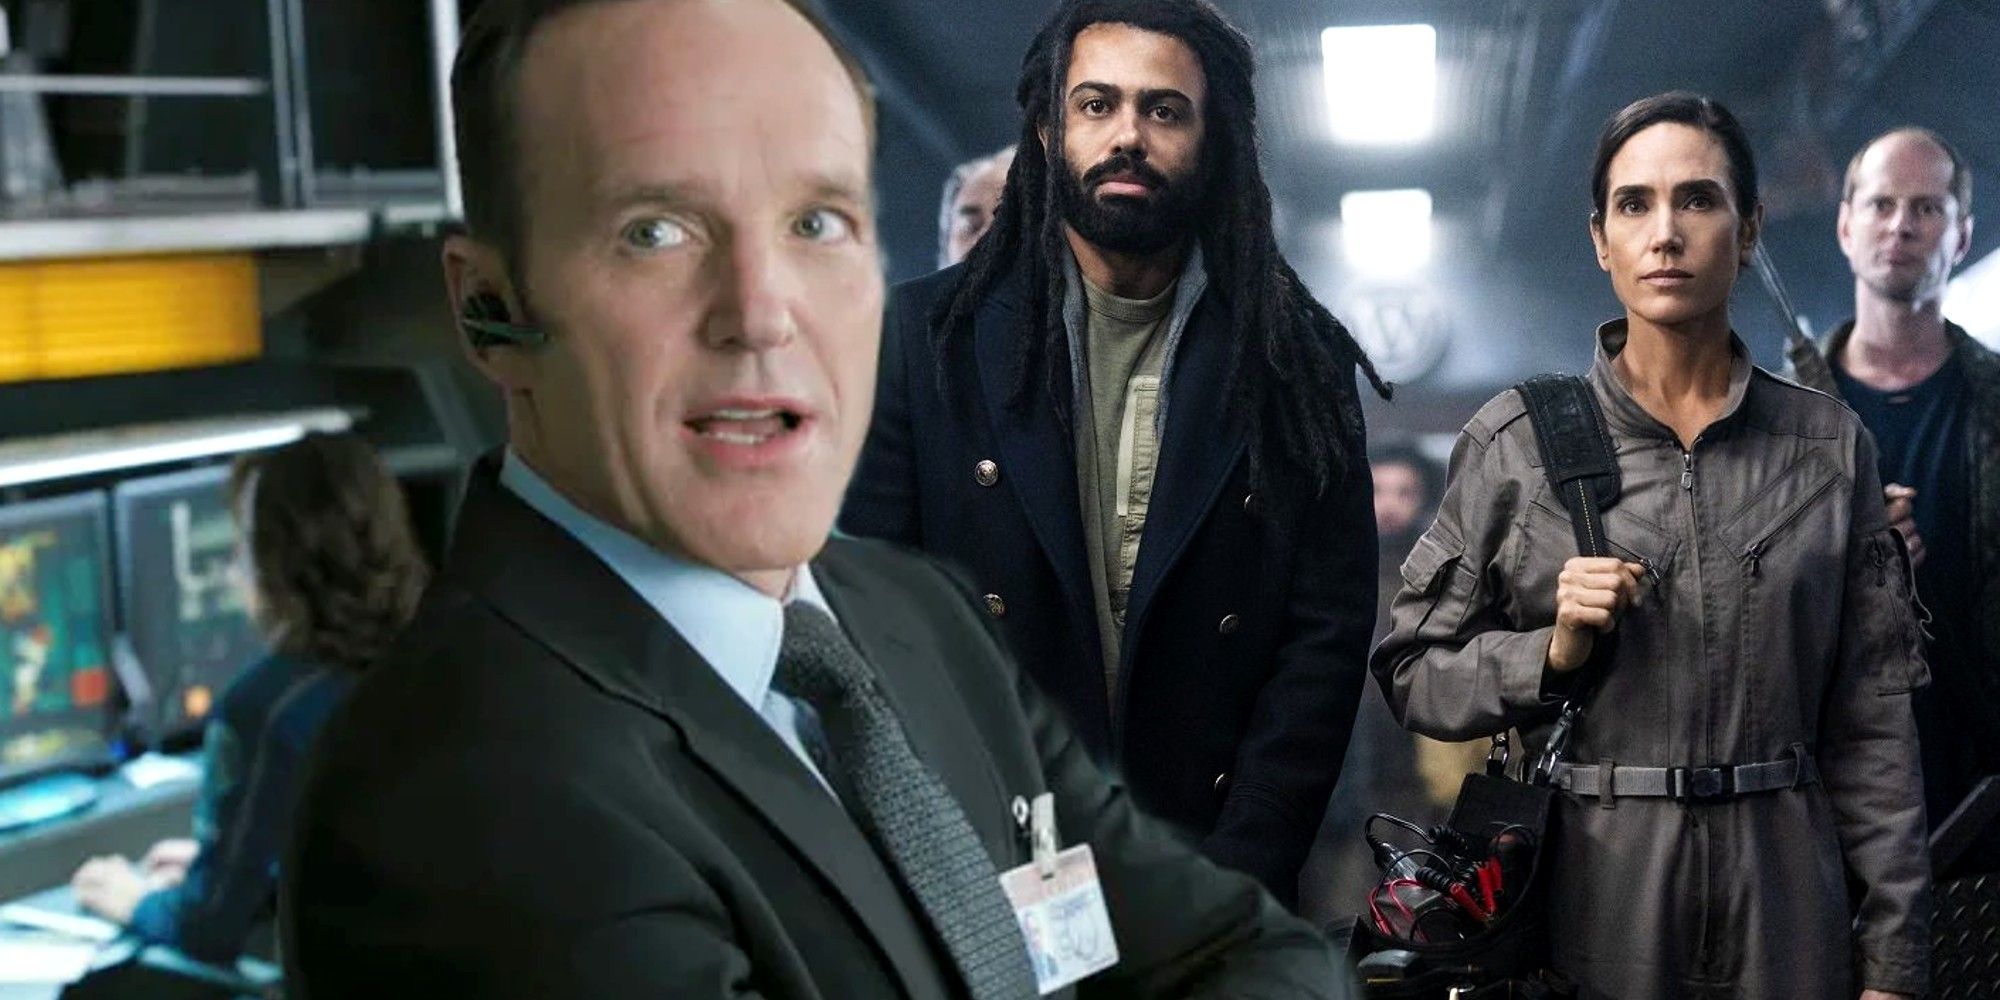 Snowpiercer Season 4 Daveed Diggs and Jennifer Connelly as Layton and Melanie and Clark Gregg as Phil Coulson